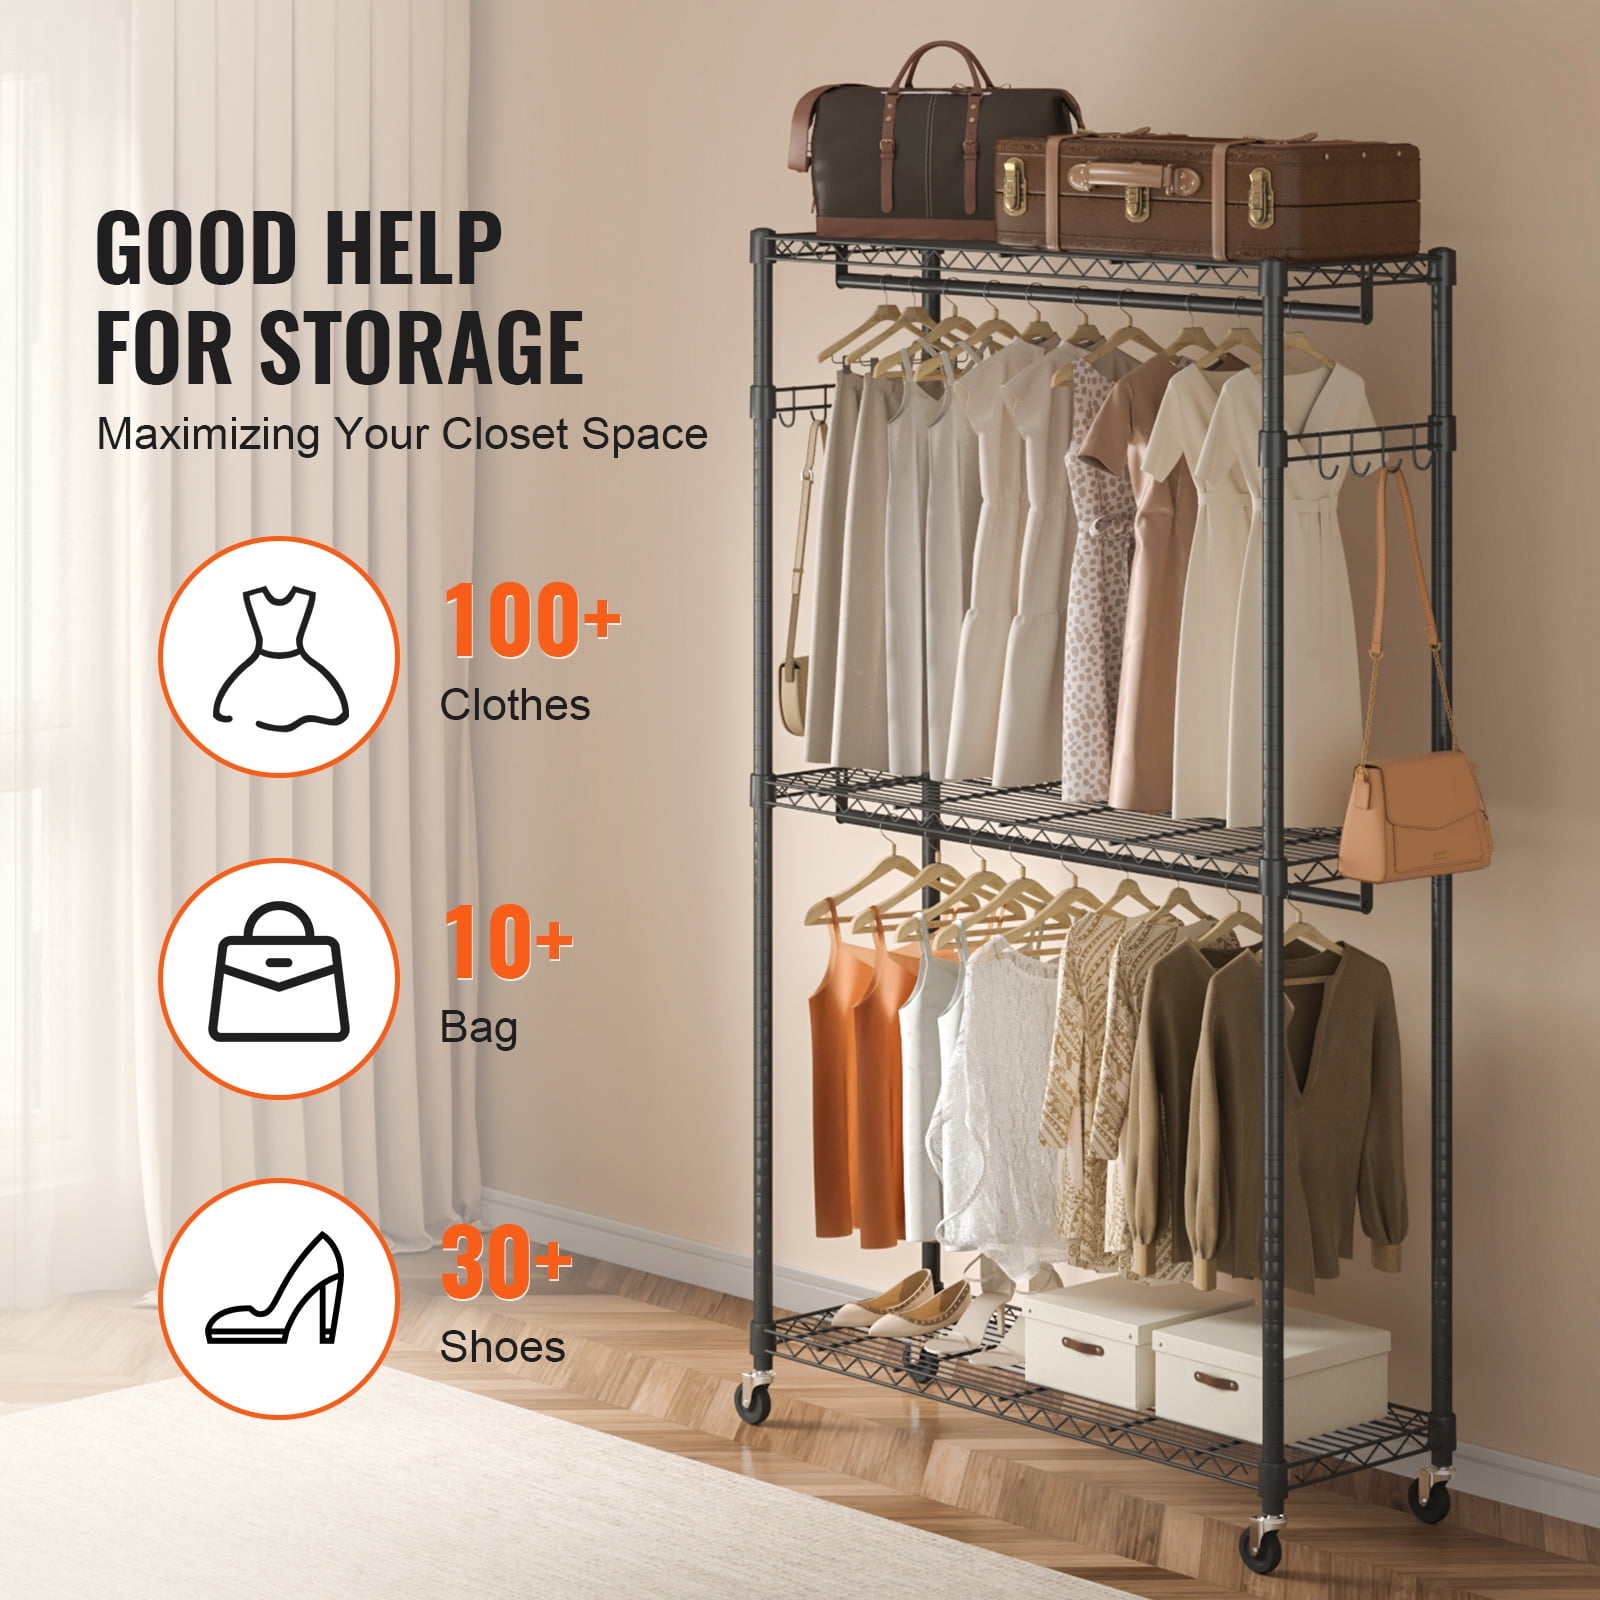 BYBLIGHT 78 in. Brown Free-standing Industrial Clothes Rack